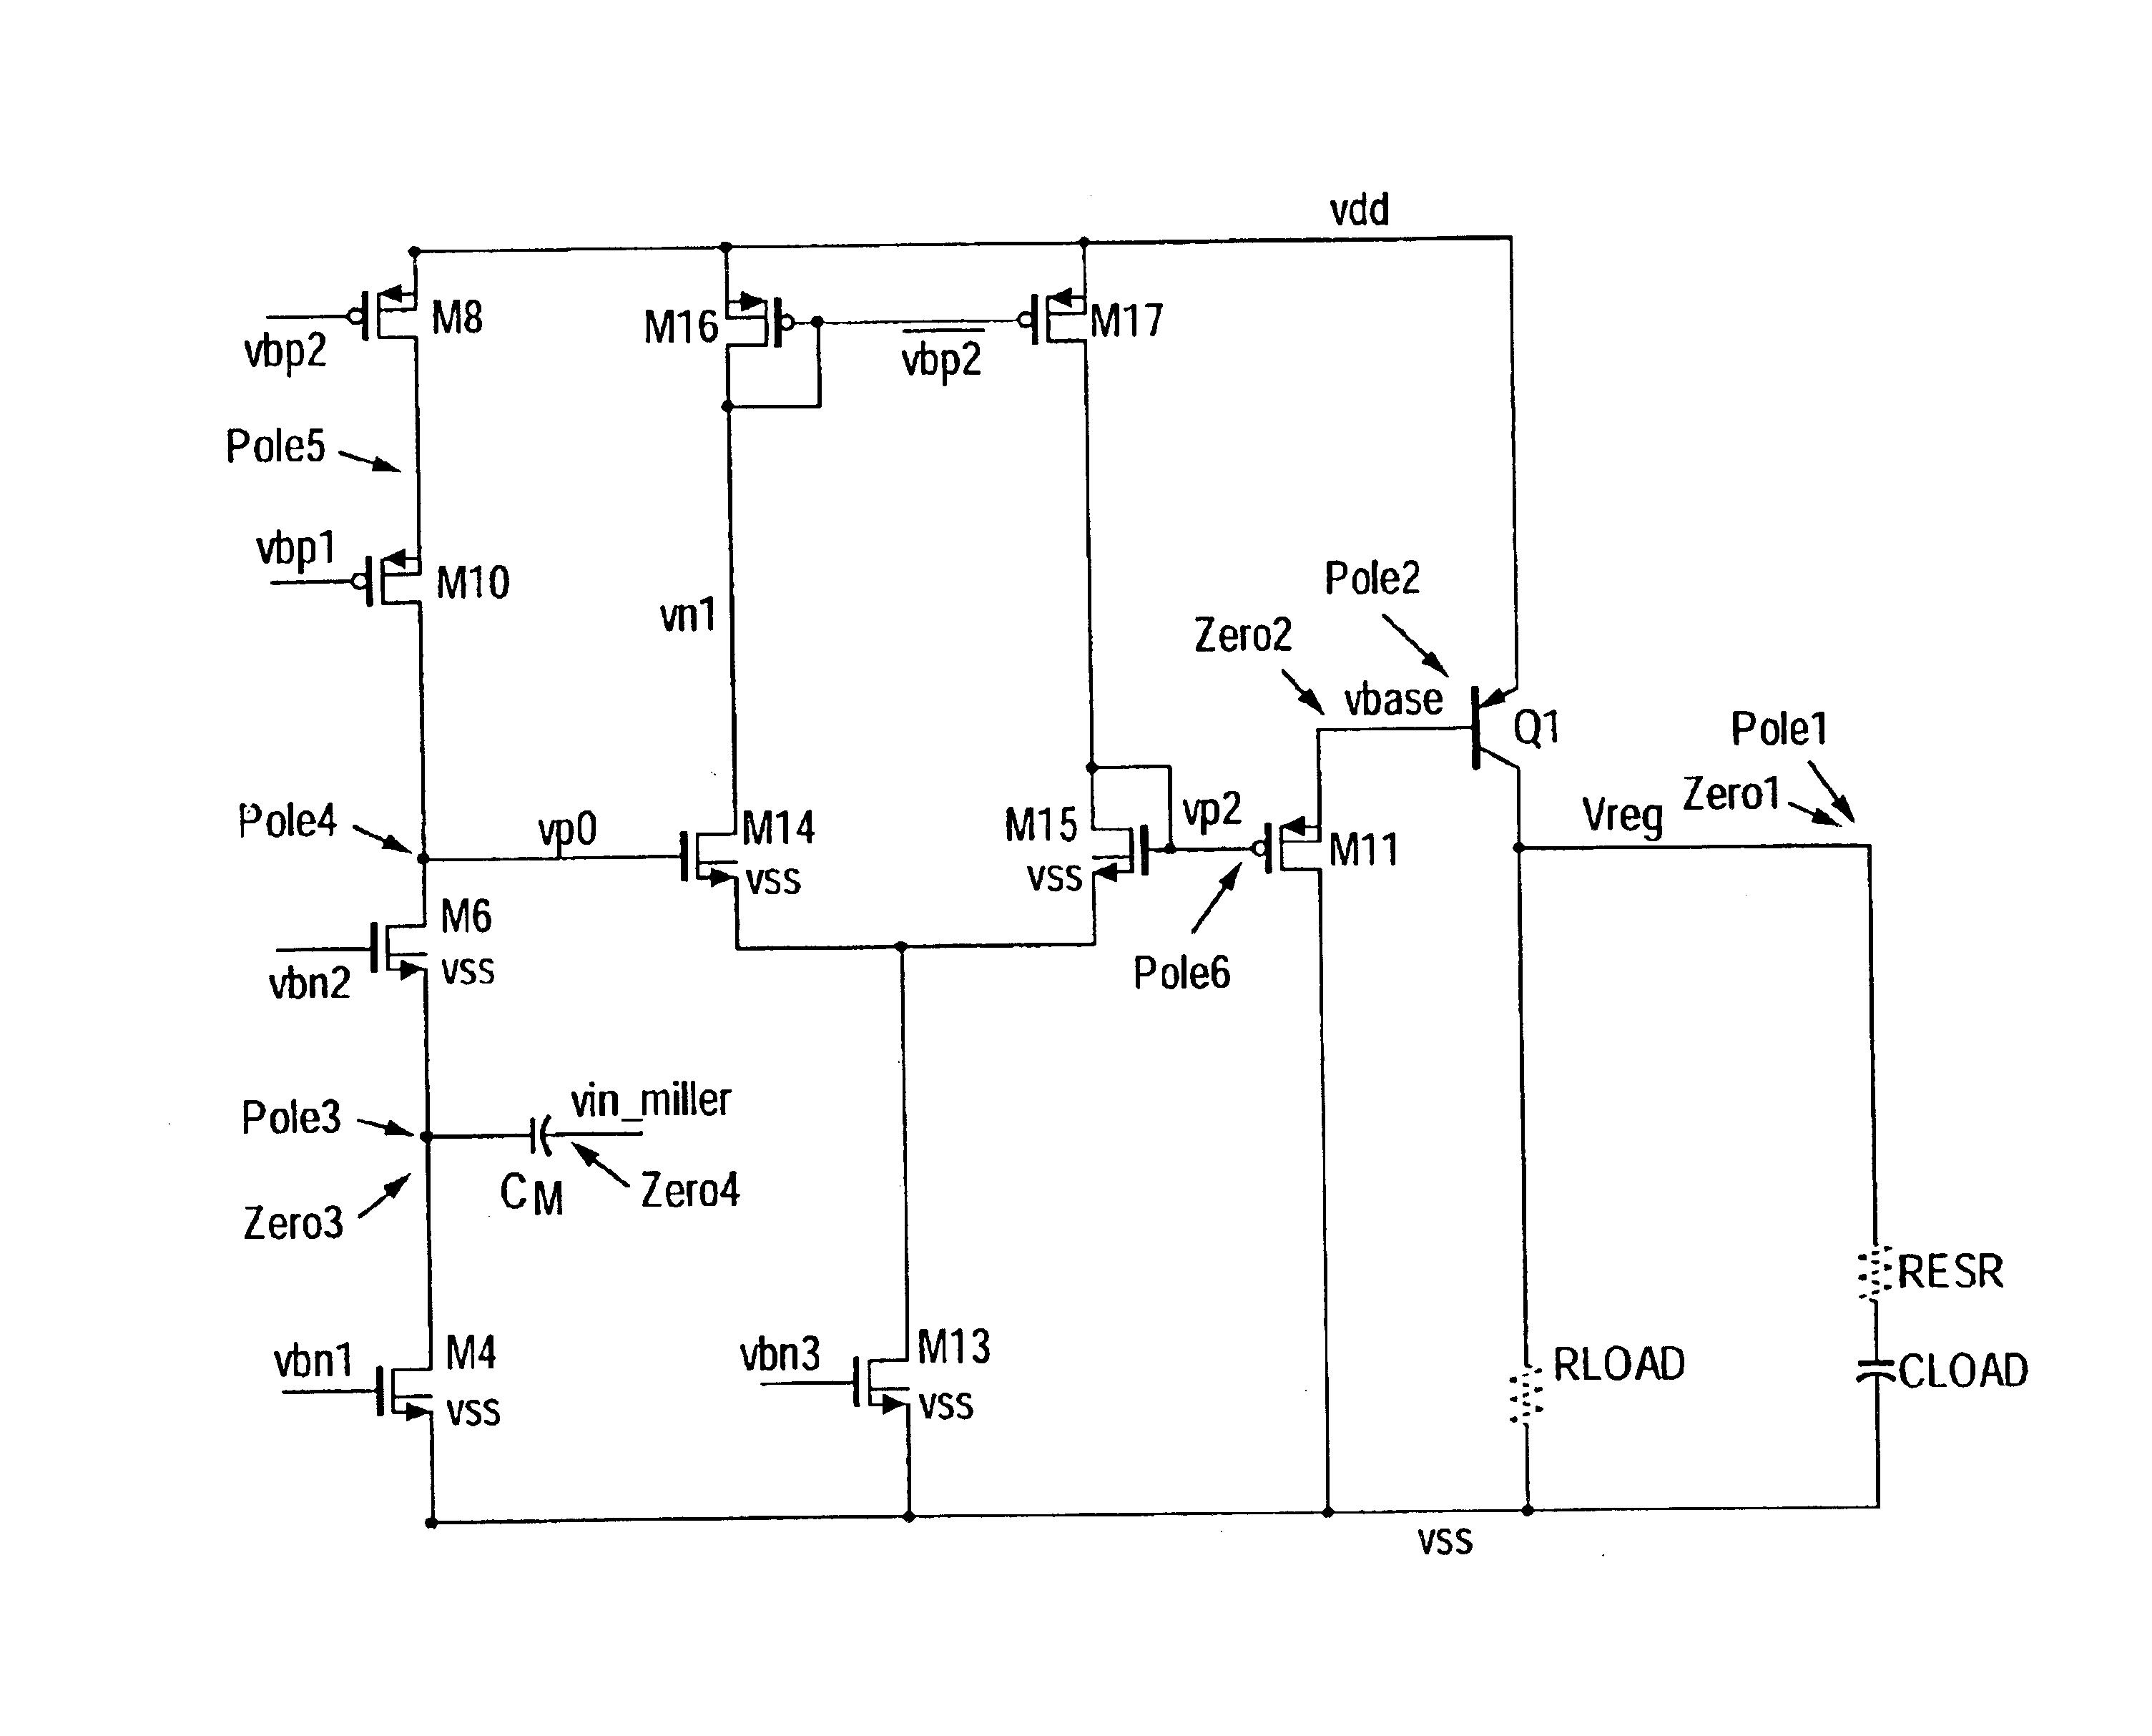 Amplifier with miller-effect compensation for use in closed loop system such as low dropout voltage regulator